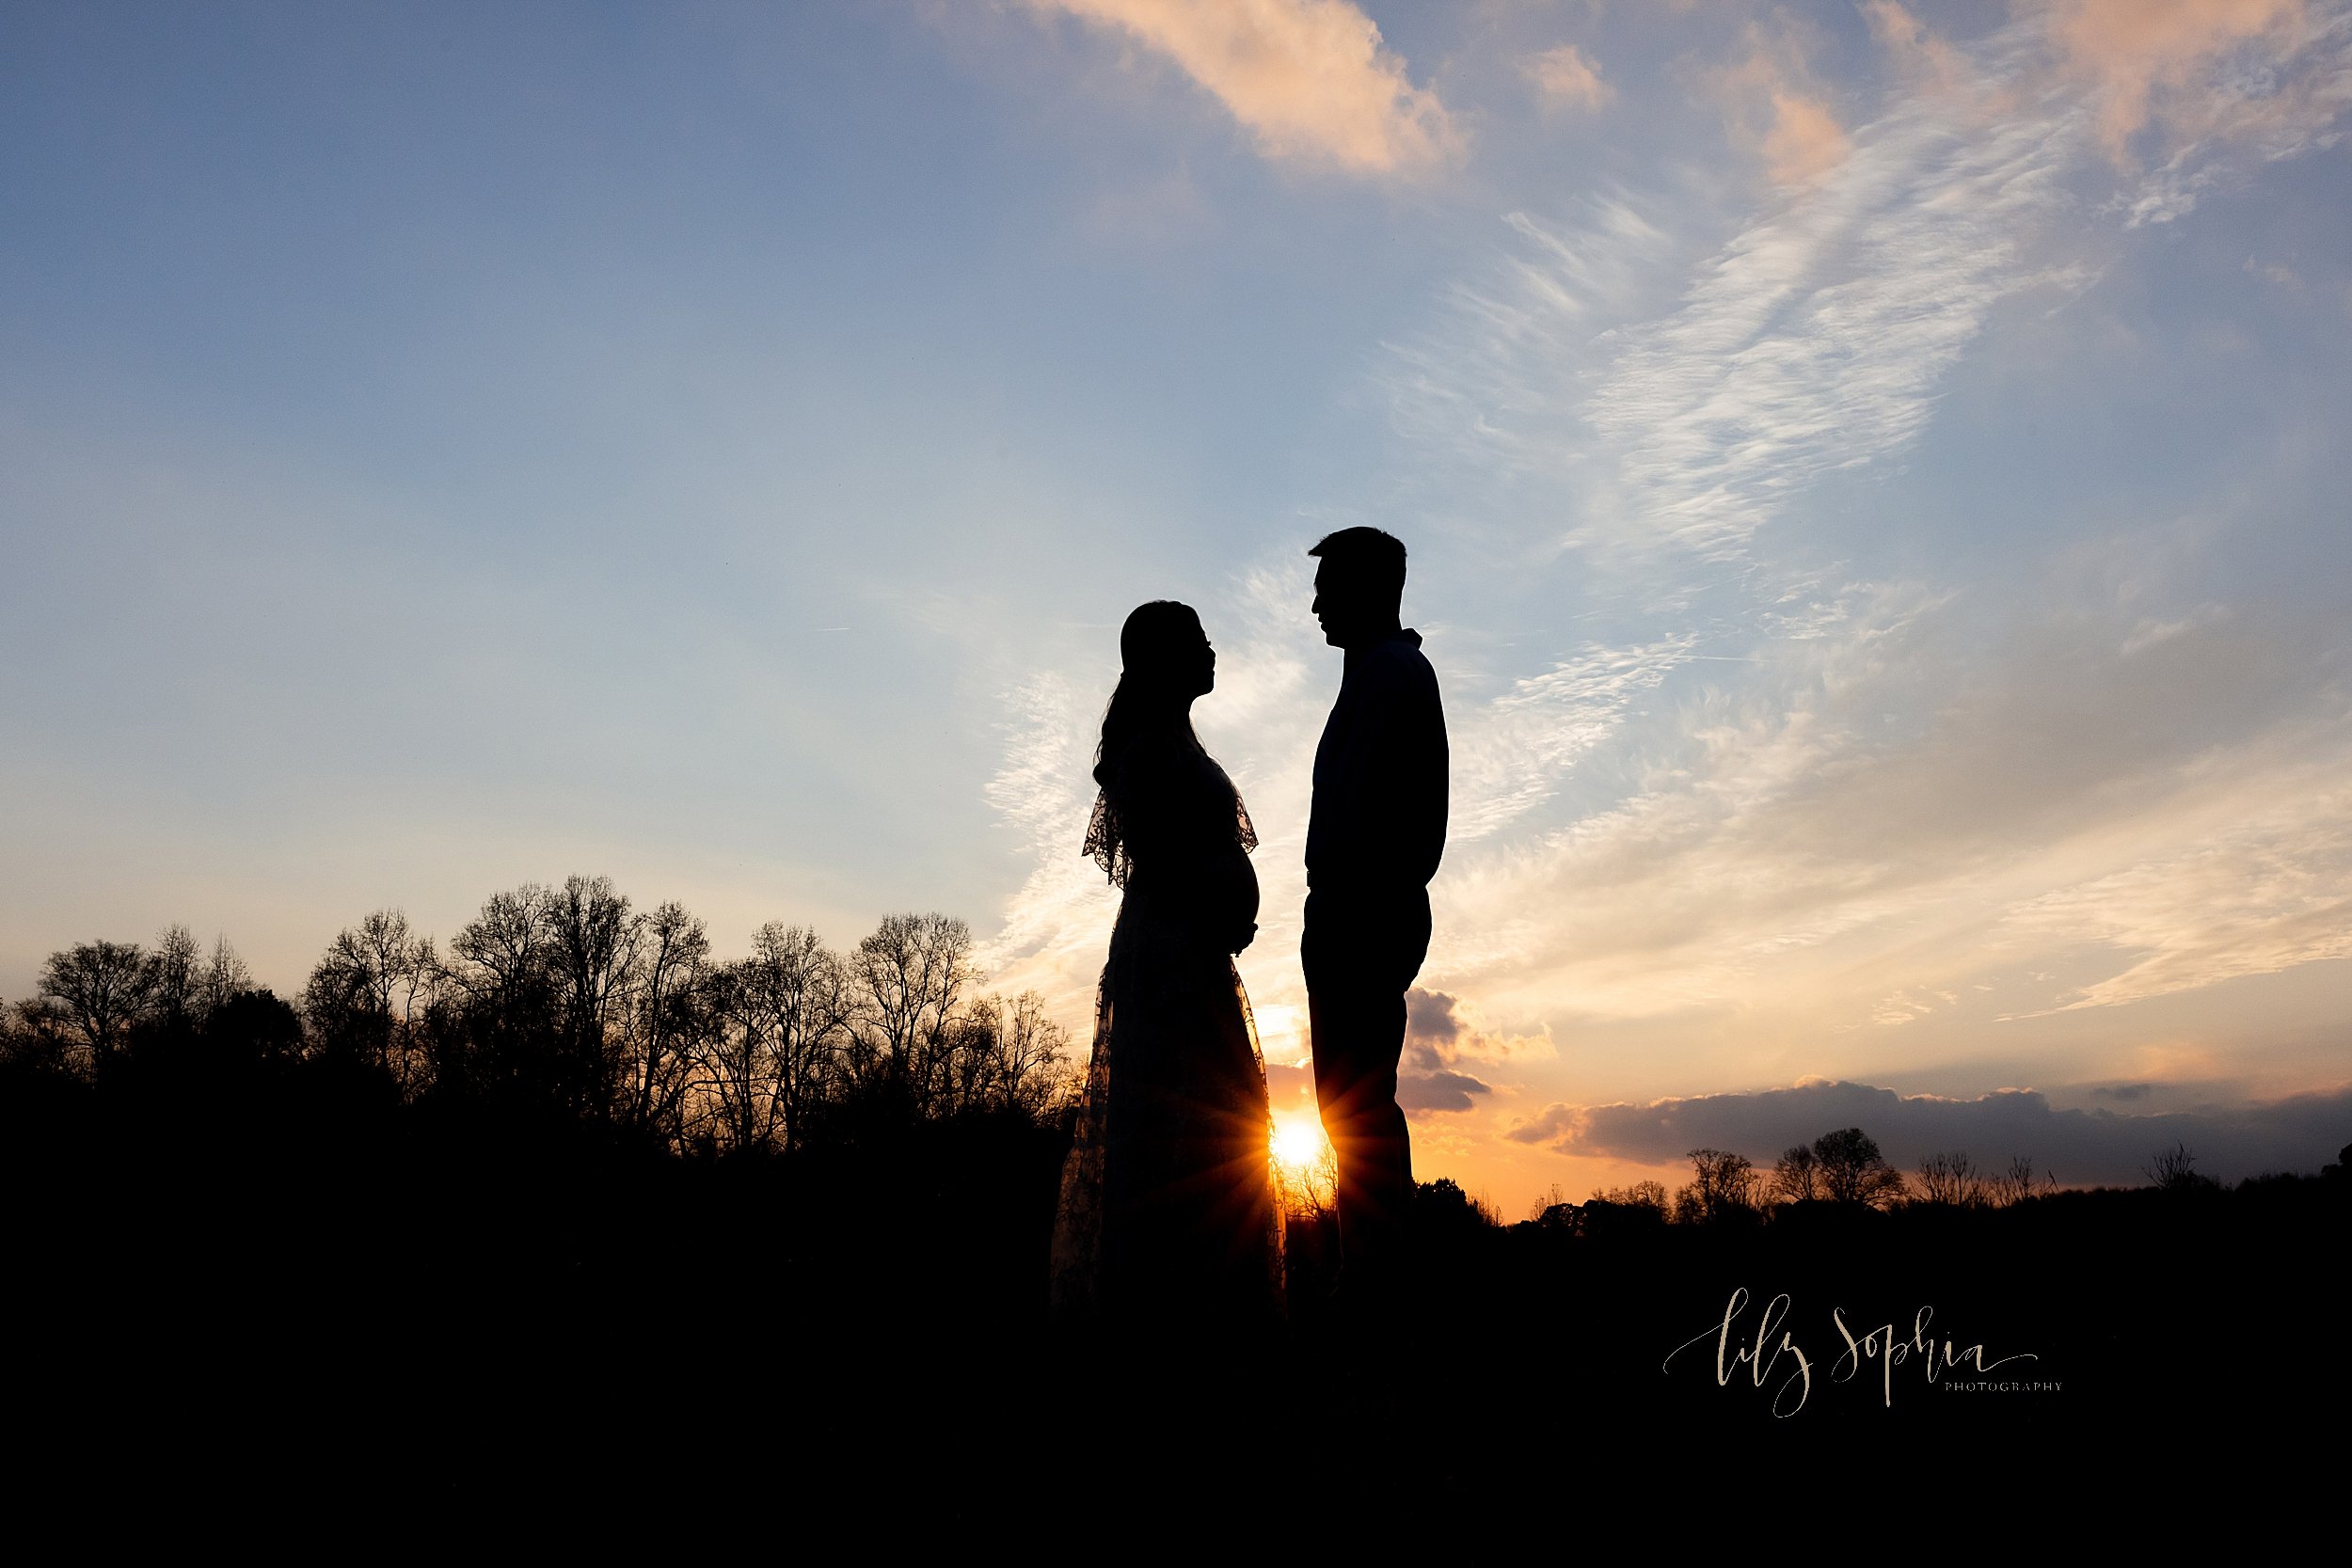  Maternity photograph taken at sunset as the couple face one another atop a grassy knoll in a field near Atlanta, Georgia highlighting their profile silhouettes. 